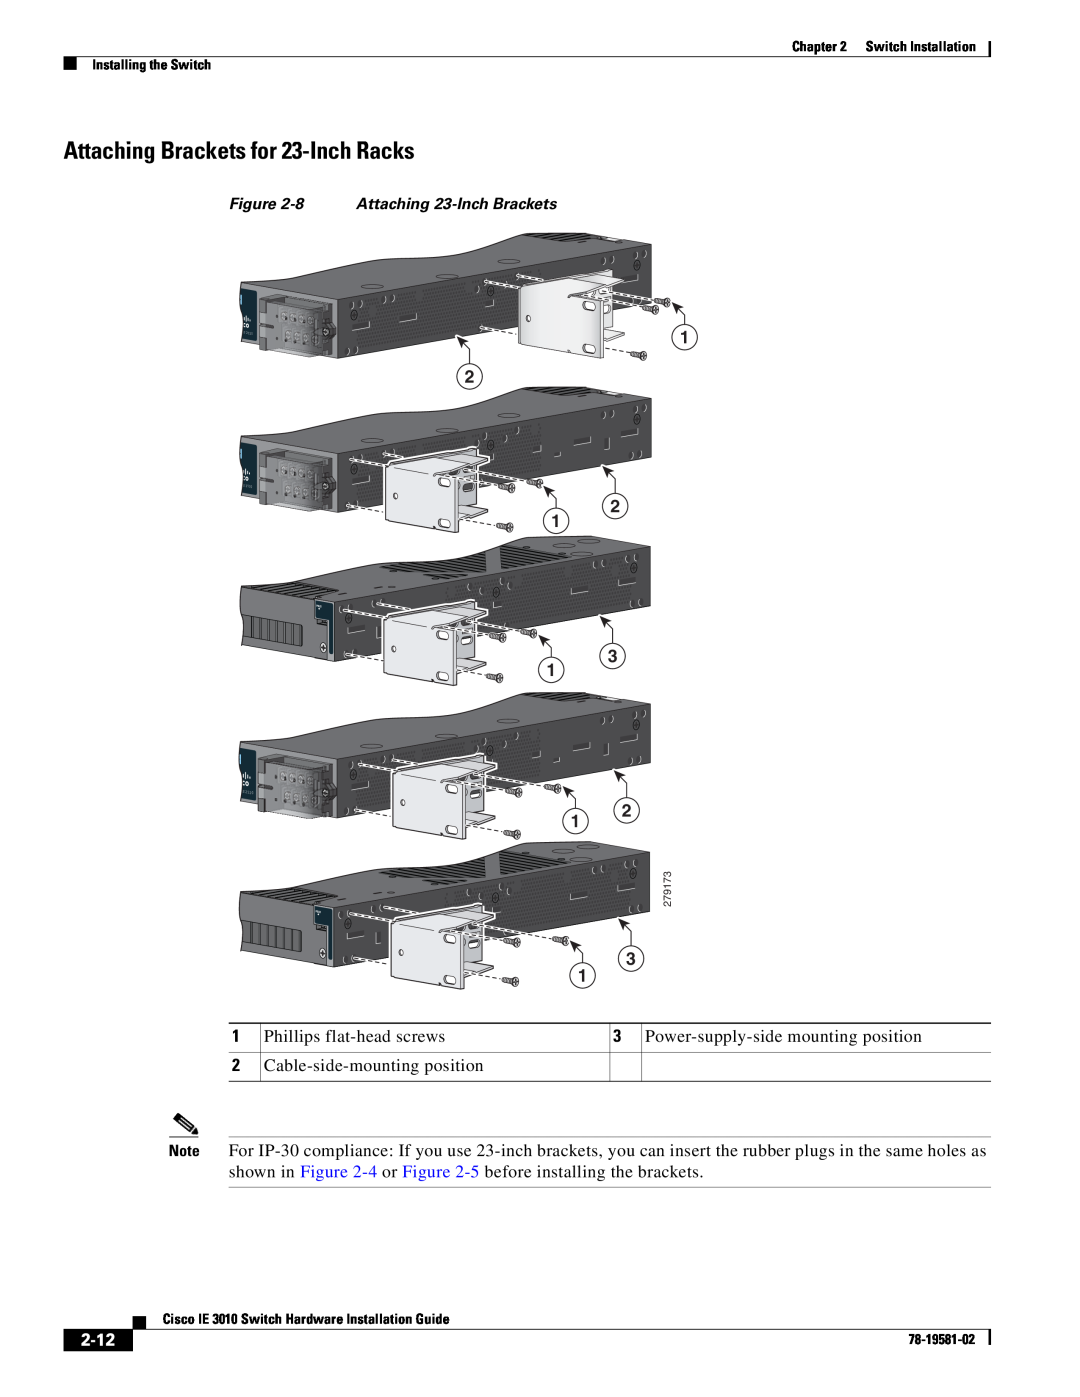 Cisco Systems IE301024TC manual Attaching Brackets for 23-Inch Racks, 2-12, 8 Attaching 23-Inch Brackets 